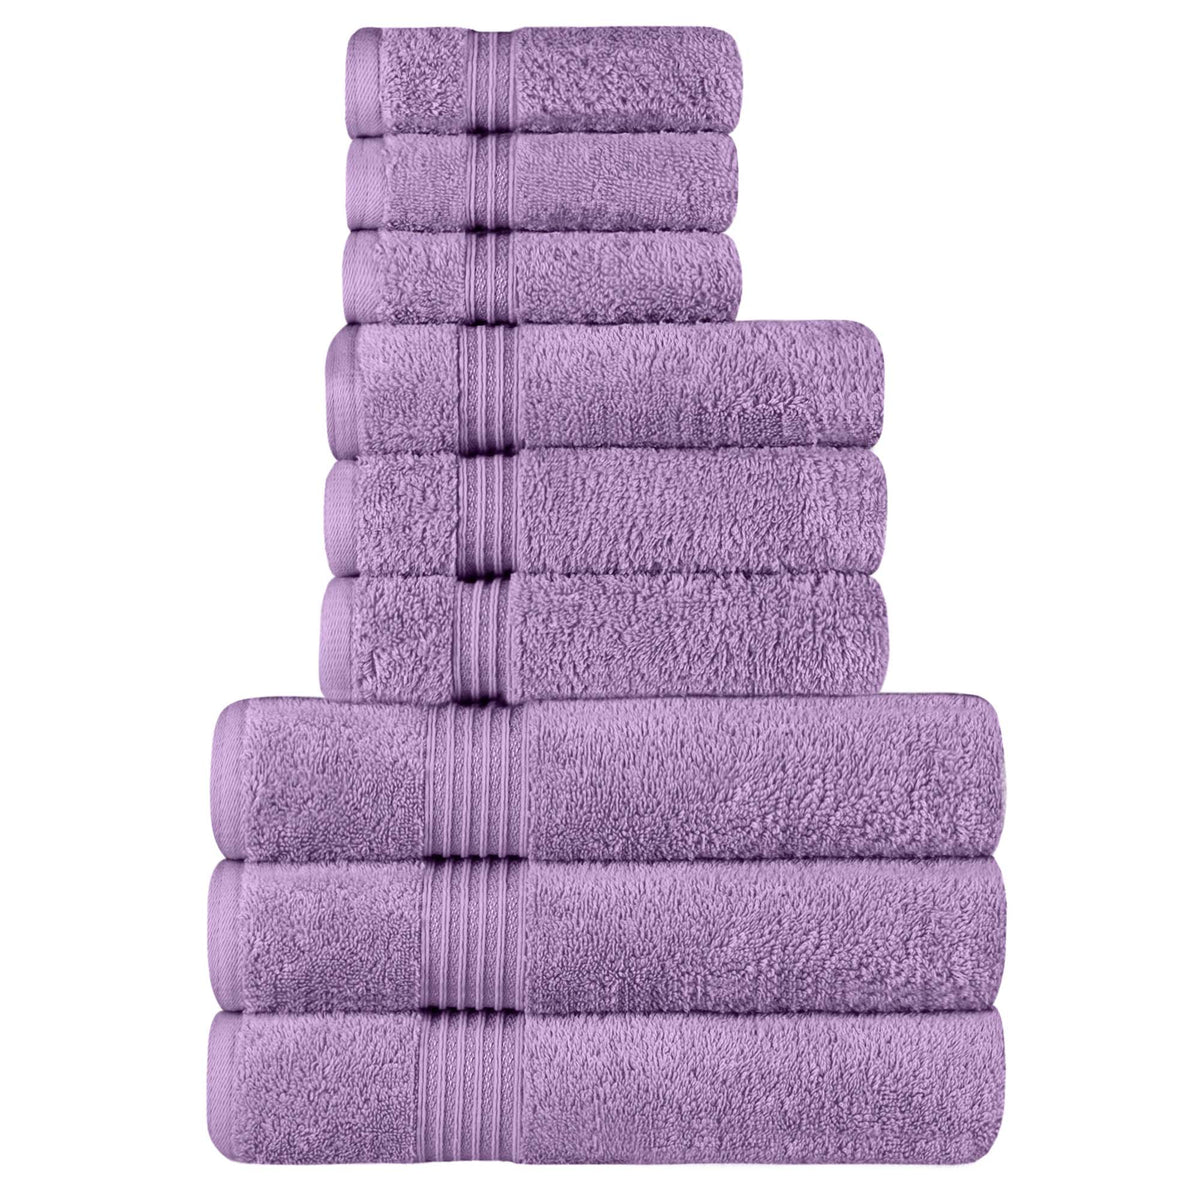 Egyptian Cotton Highly Absorbent Solid 9 Piece Ultra Soft Towel Set - Royal Purple